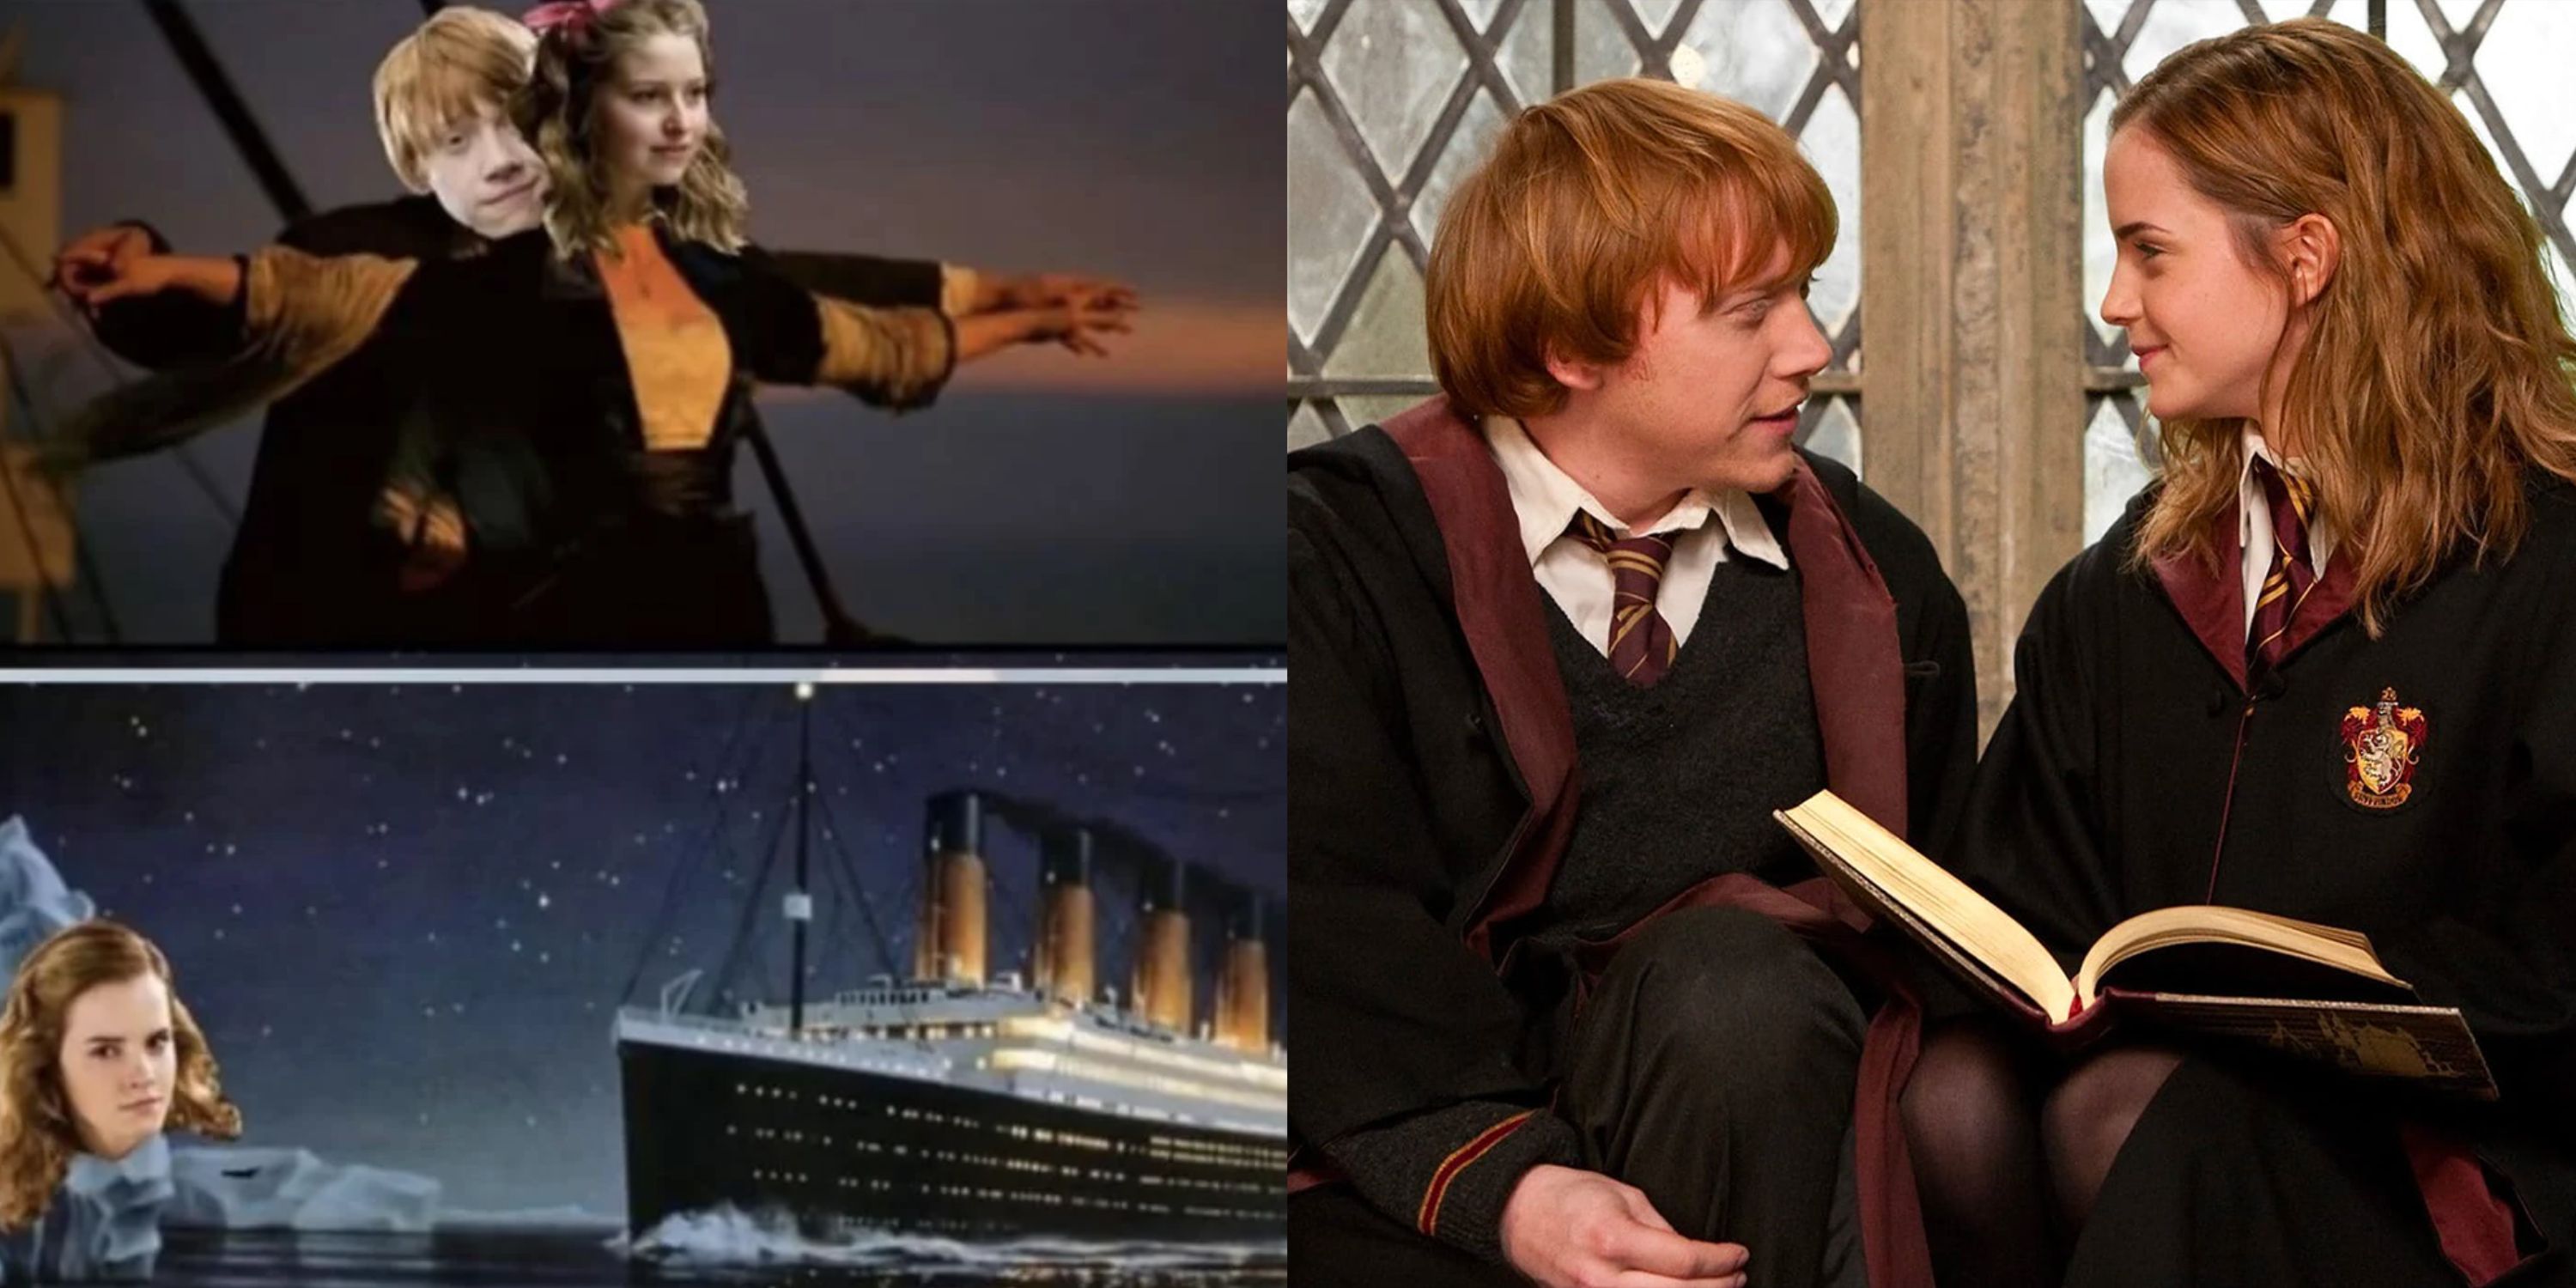 Split image of a Ron and Hermione Titanic meme (where Ron is Jack, Lavender is Rose, and Hermione is the iceberg) and Ron and Hermione studying together while smiling